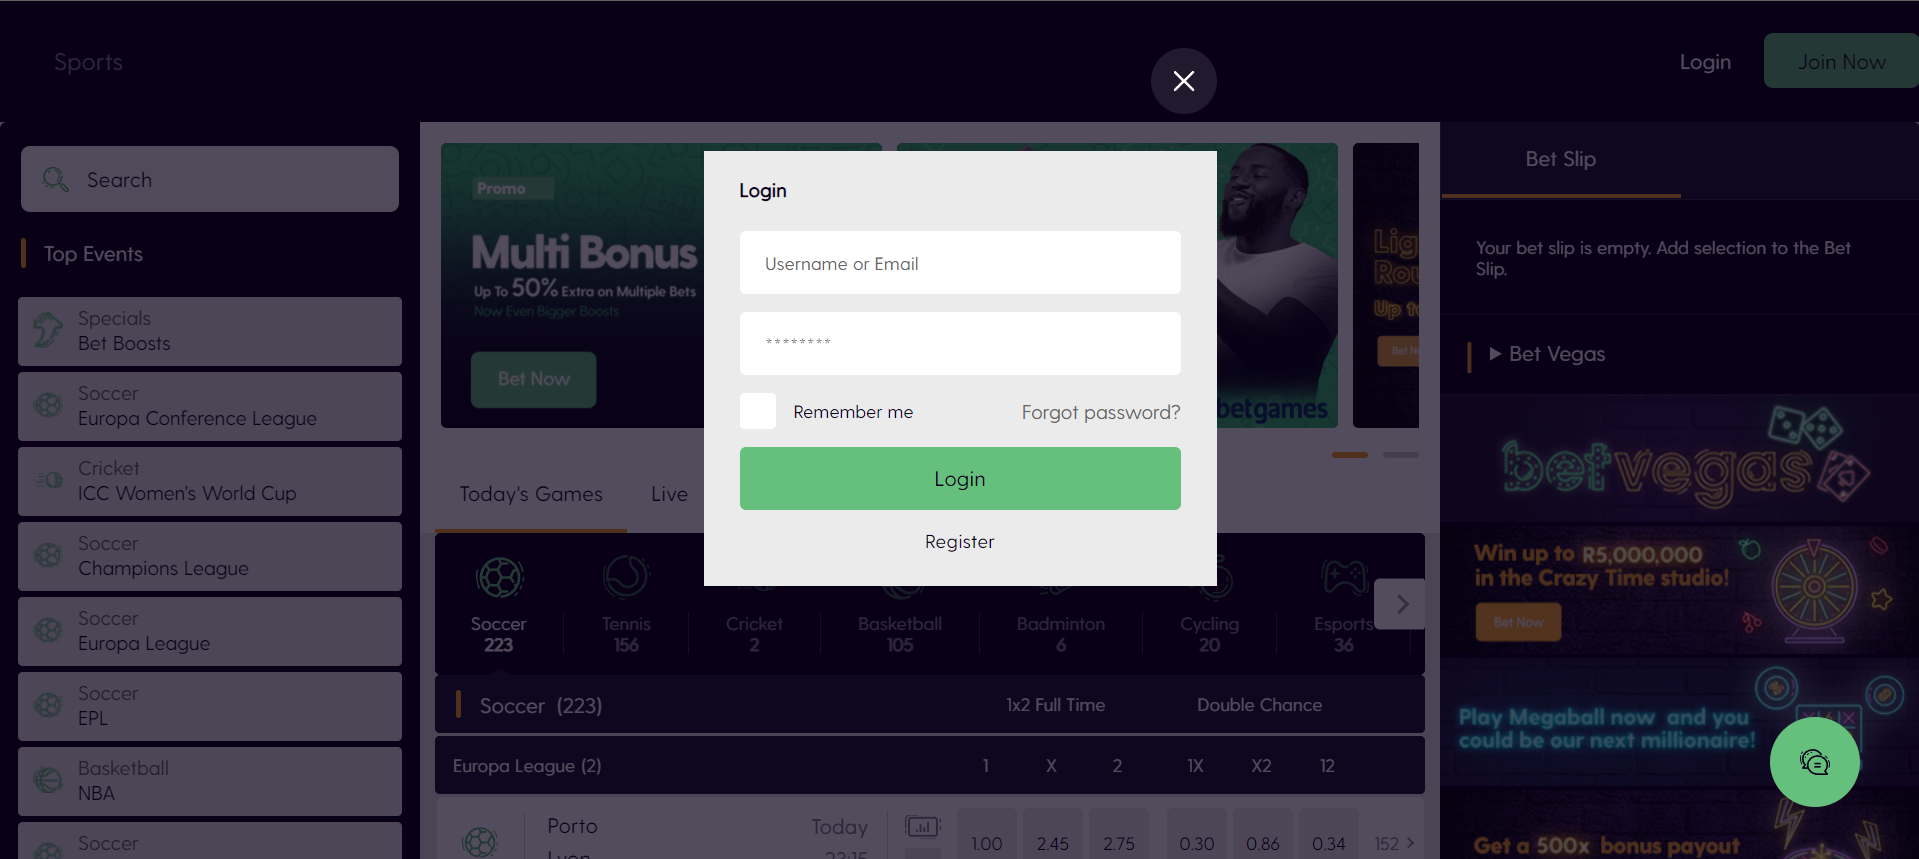 Sign in with Bet.co.za online sportsbook using your email or username in no time.